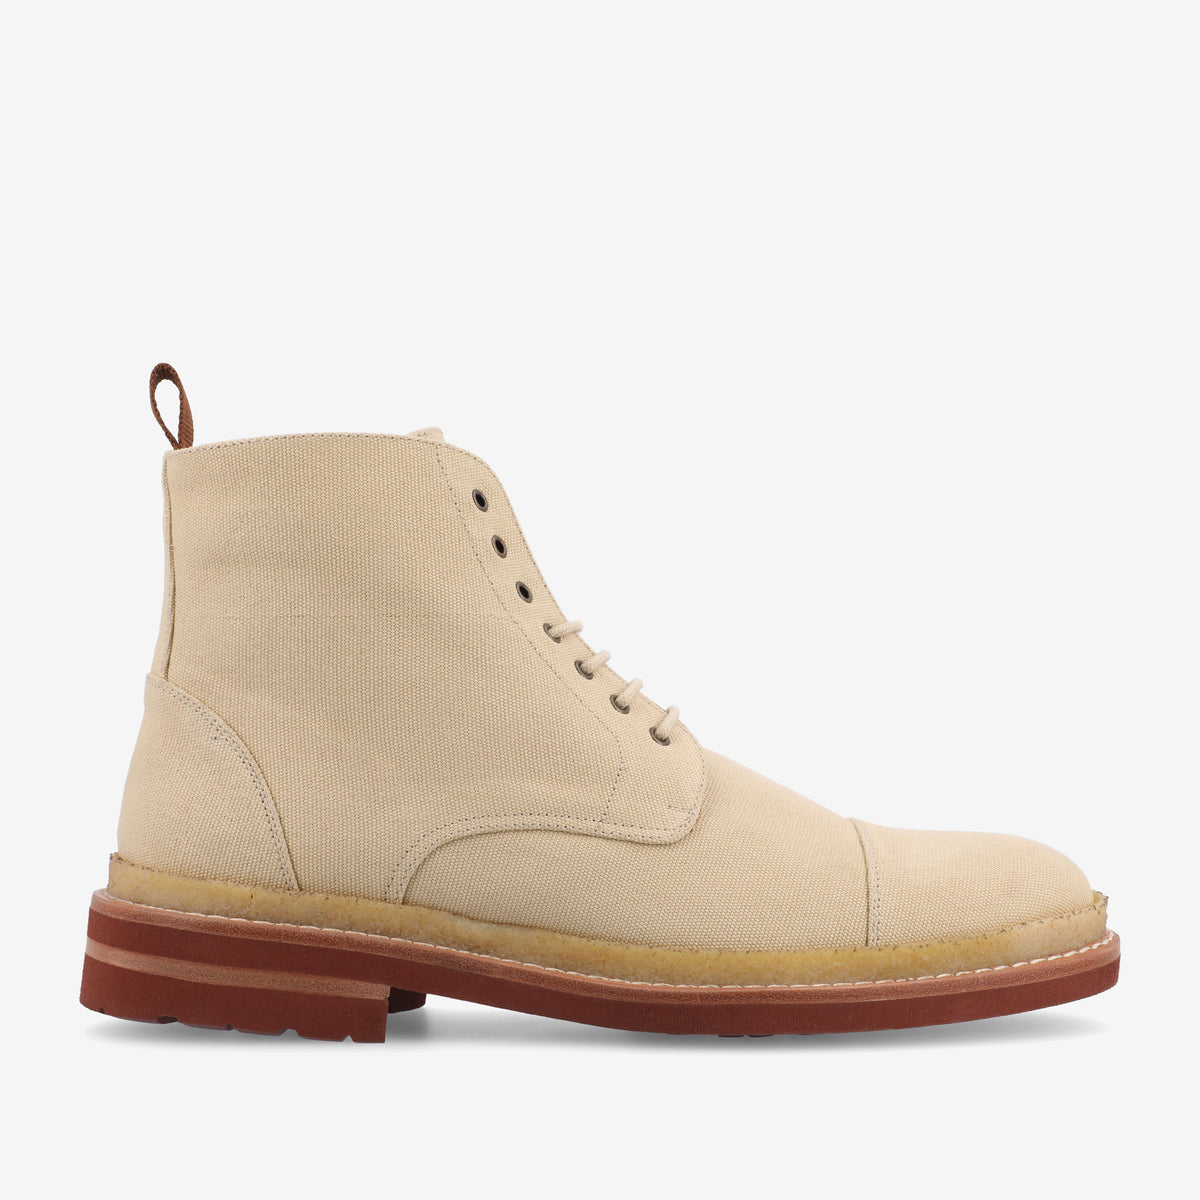 The Jaro Boot in Sand